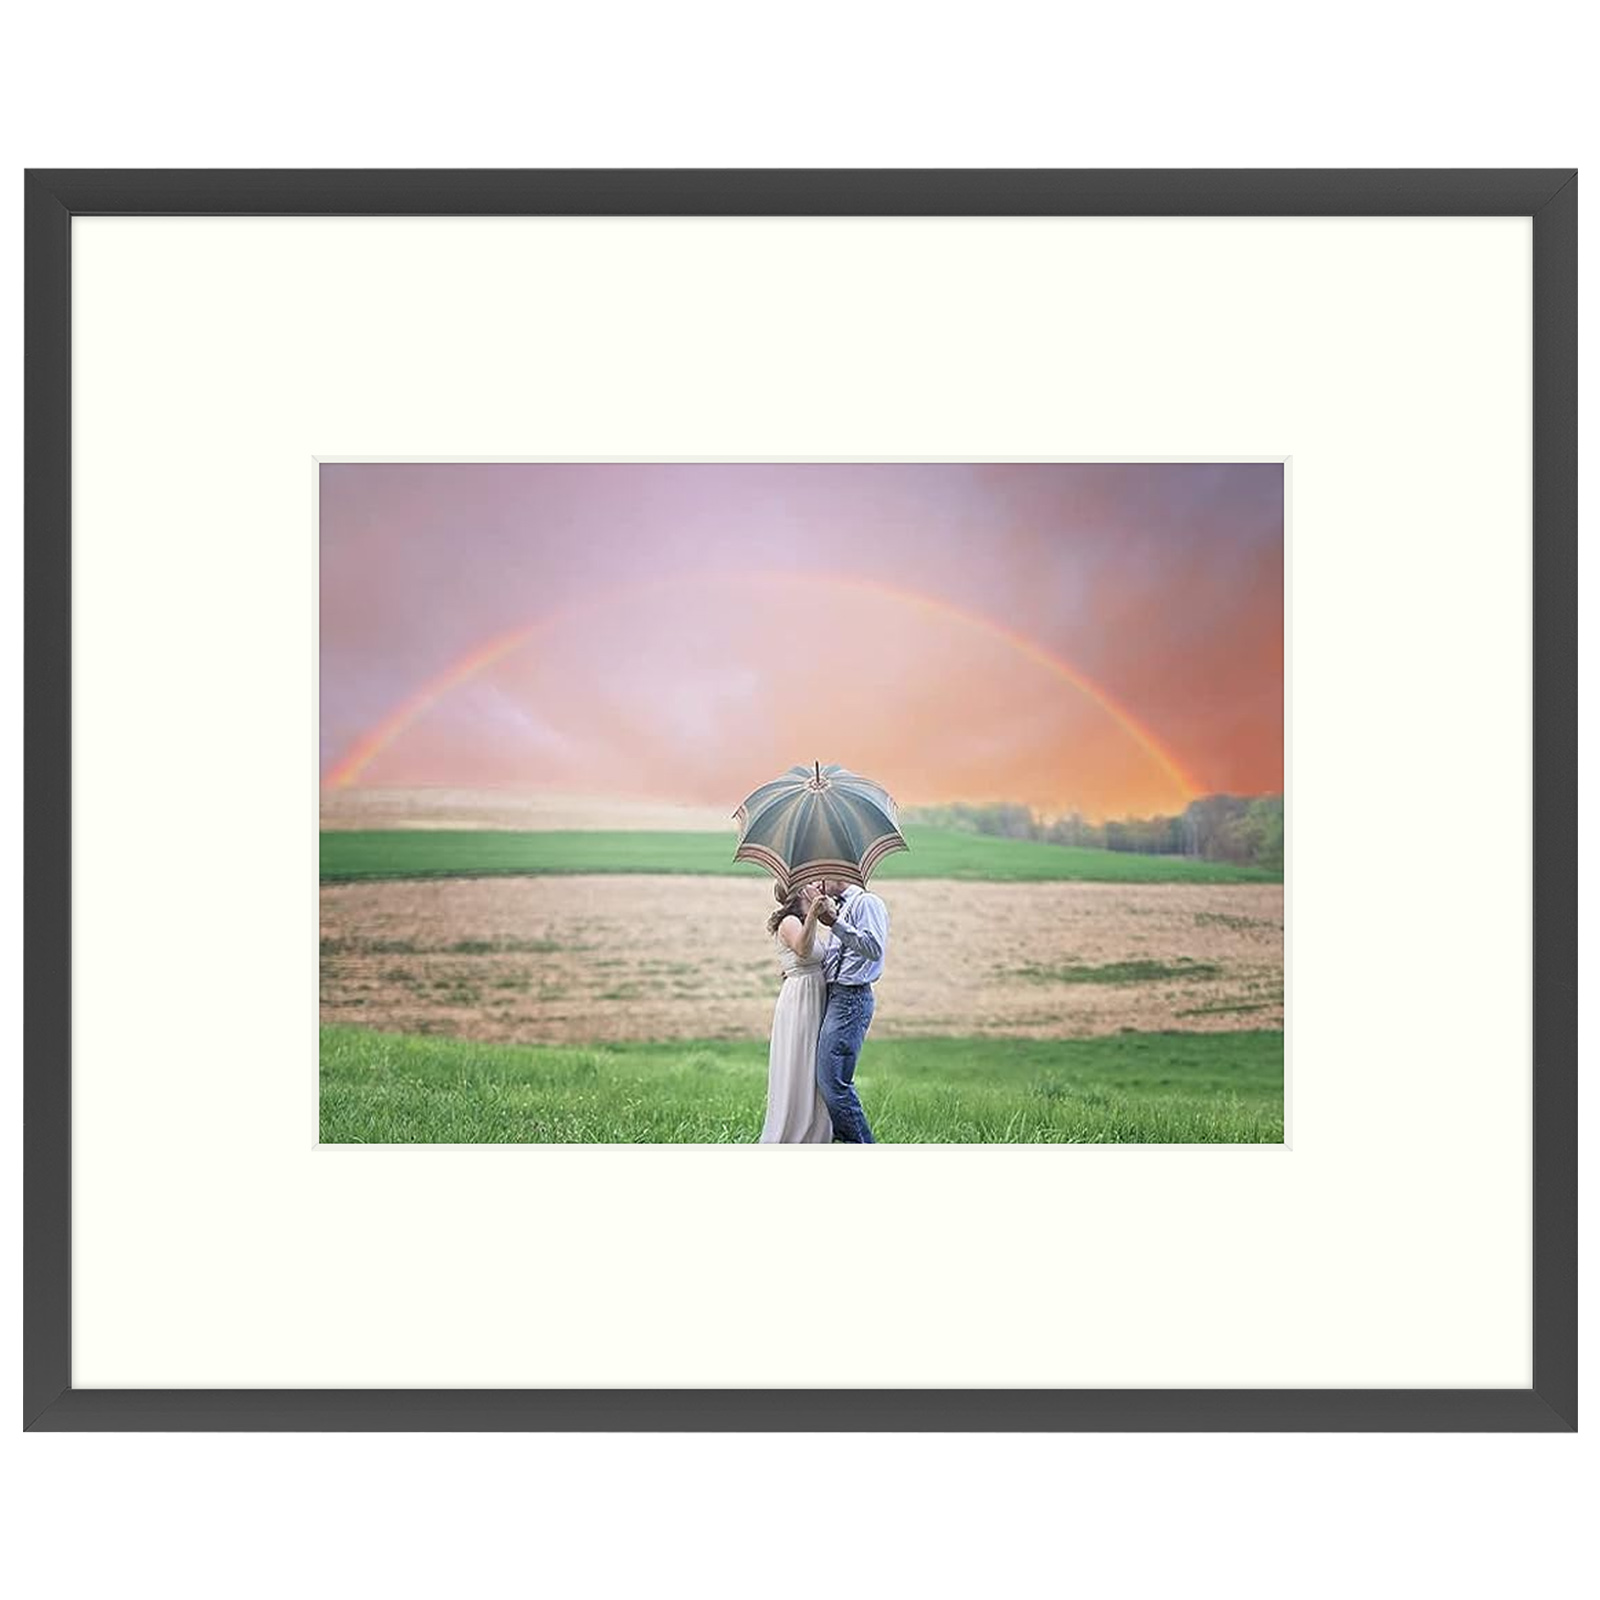 Golden State Art,5x7 Silver Aluminum Frame for 4x6 Photo with